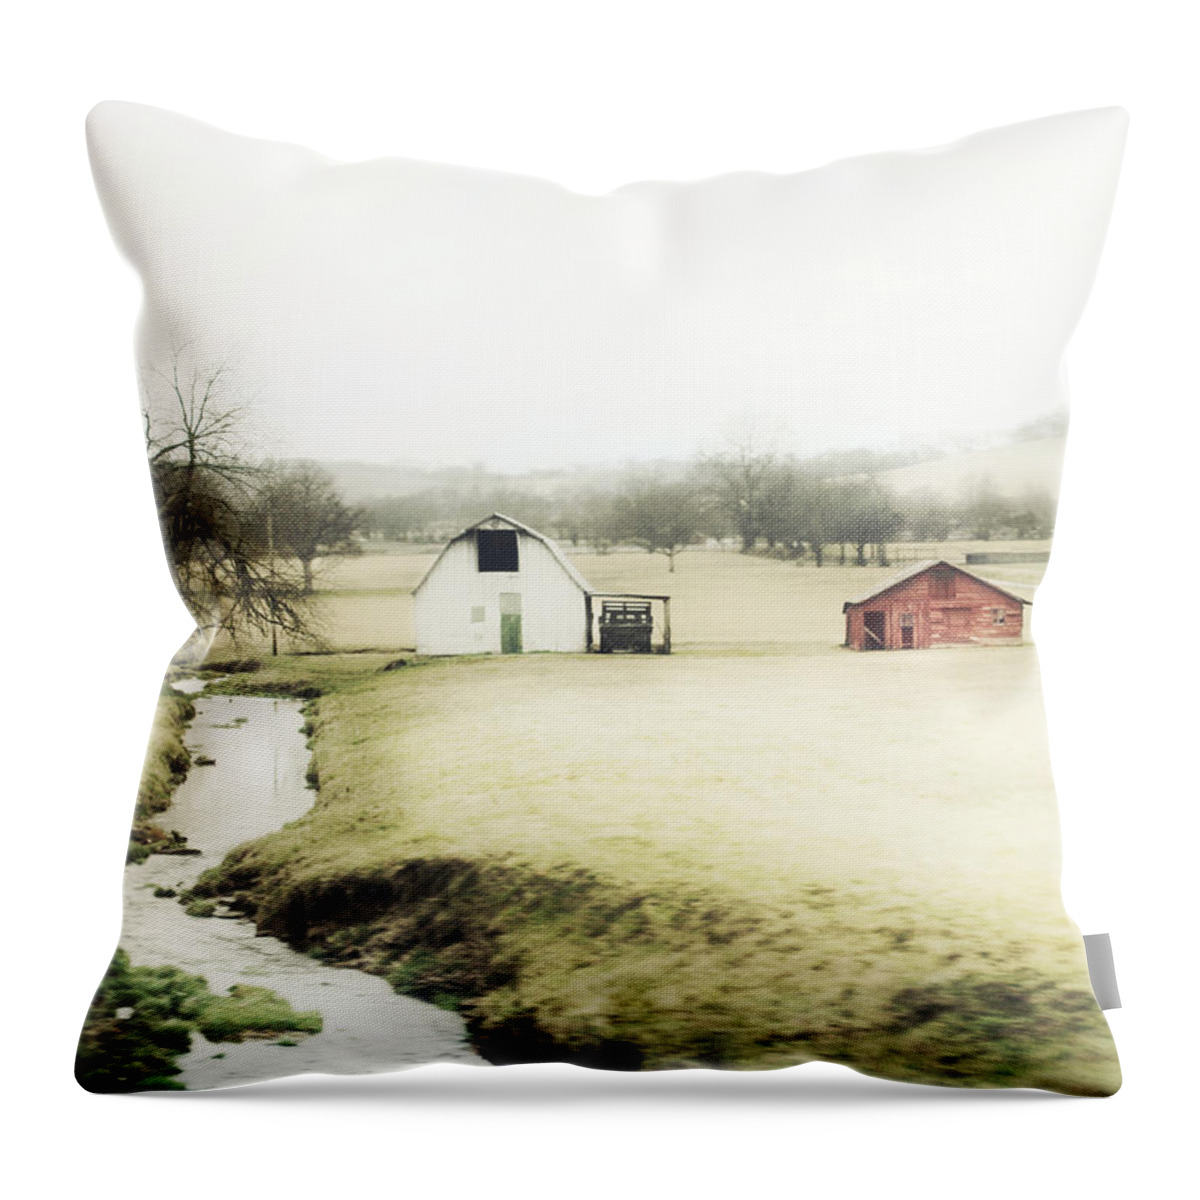 Barn Throw Pillow featuring the photograph Babbling Brook by Julie Hamilton